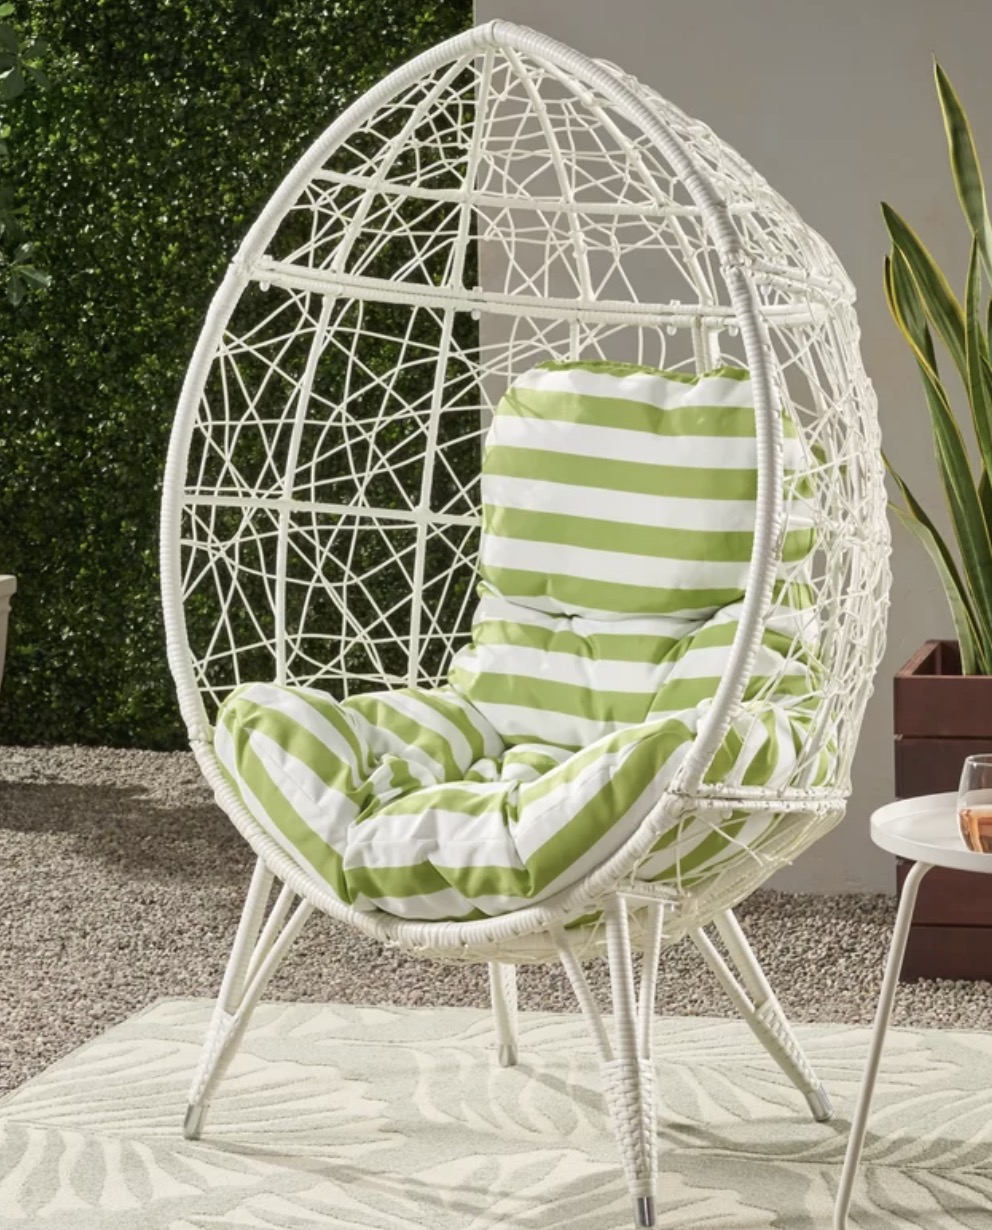 *HOT* Wellingborough Egg Chair solely $102.99 shipped!